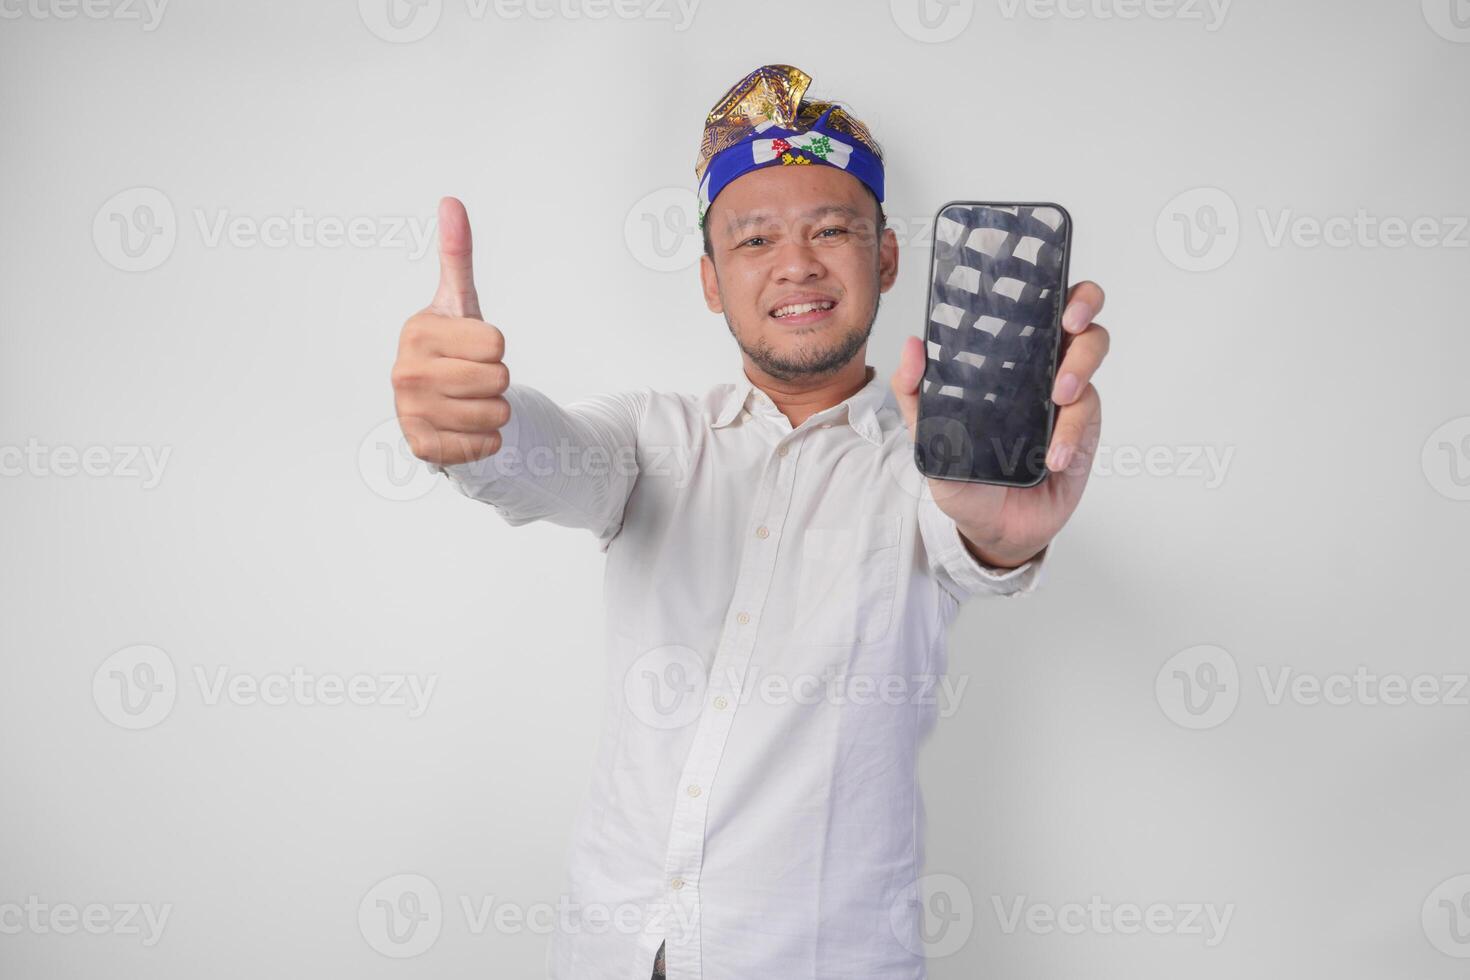 Young Balinese man wearing white shirt and traditional headdress presenting blank screen copy space on his phone while raising thumb up as an okay, good, nice gesture photo